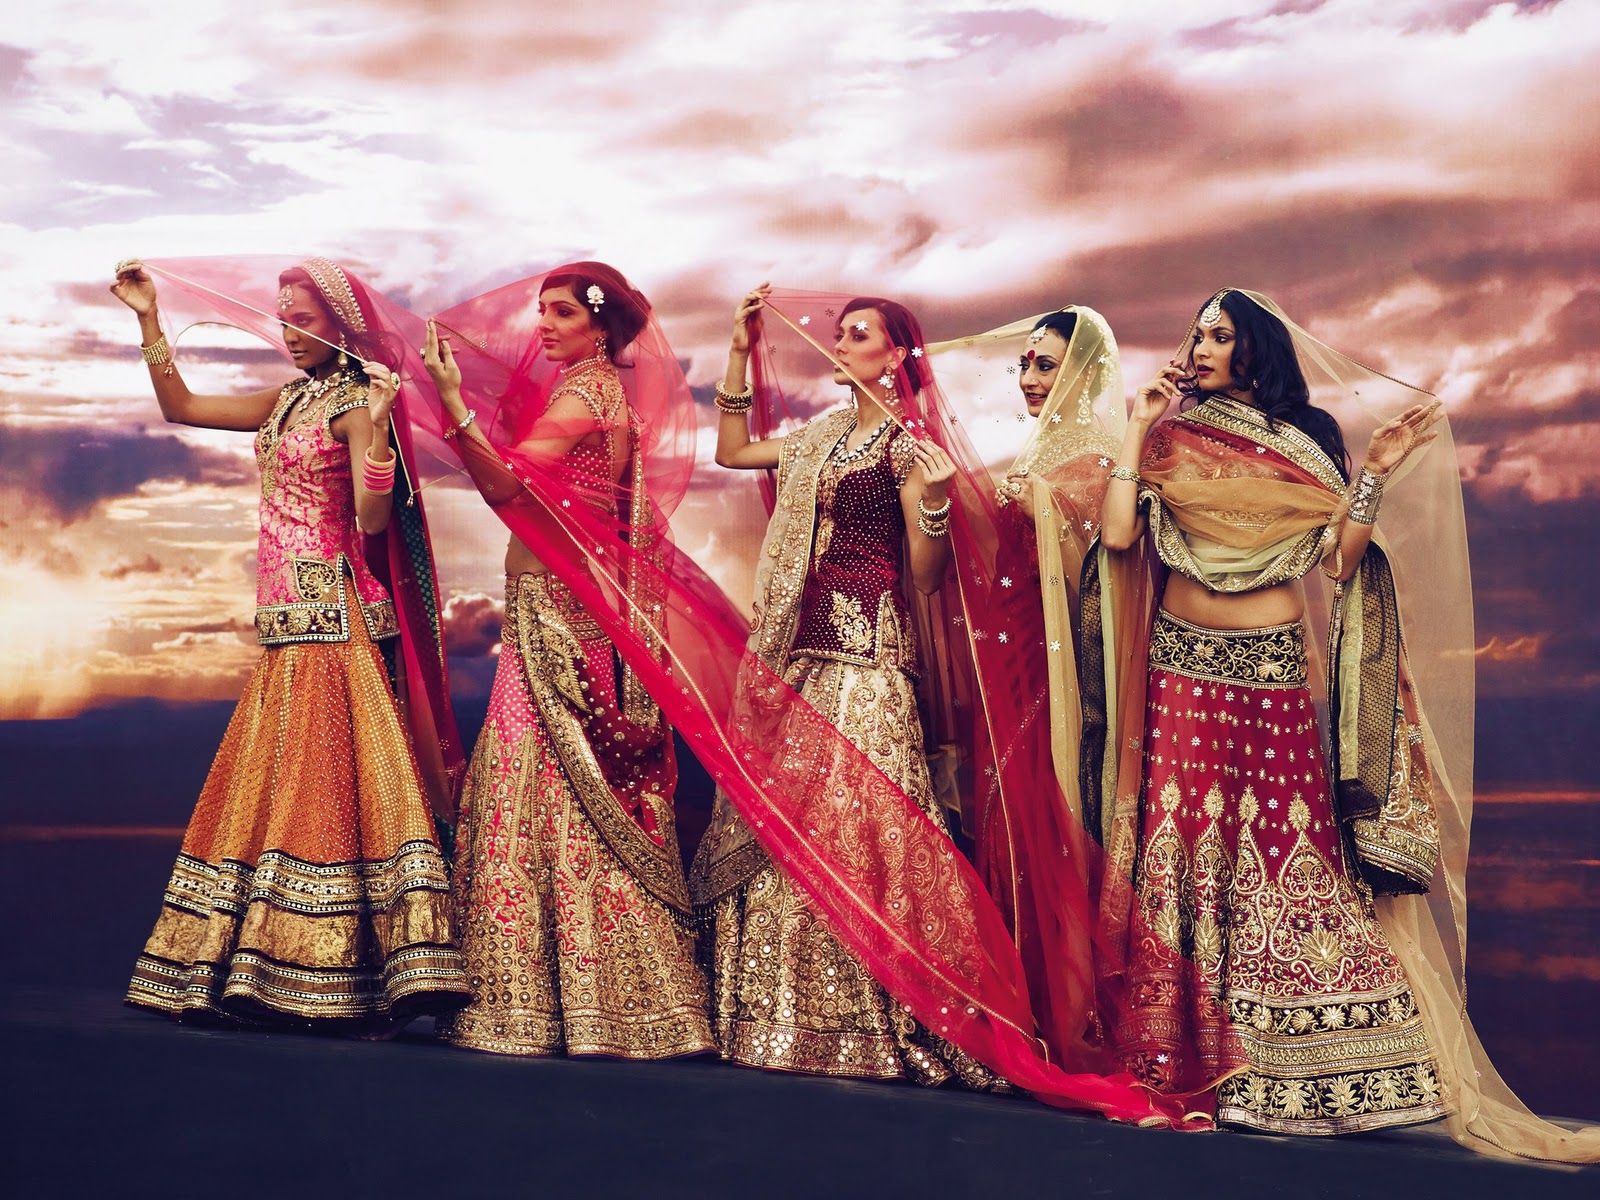 Indian fashion: Can the industry afford the extravagance?